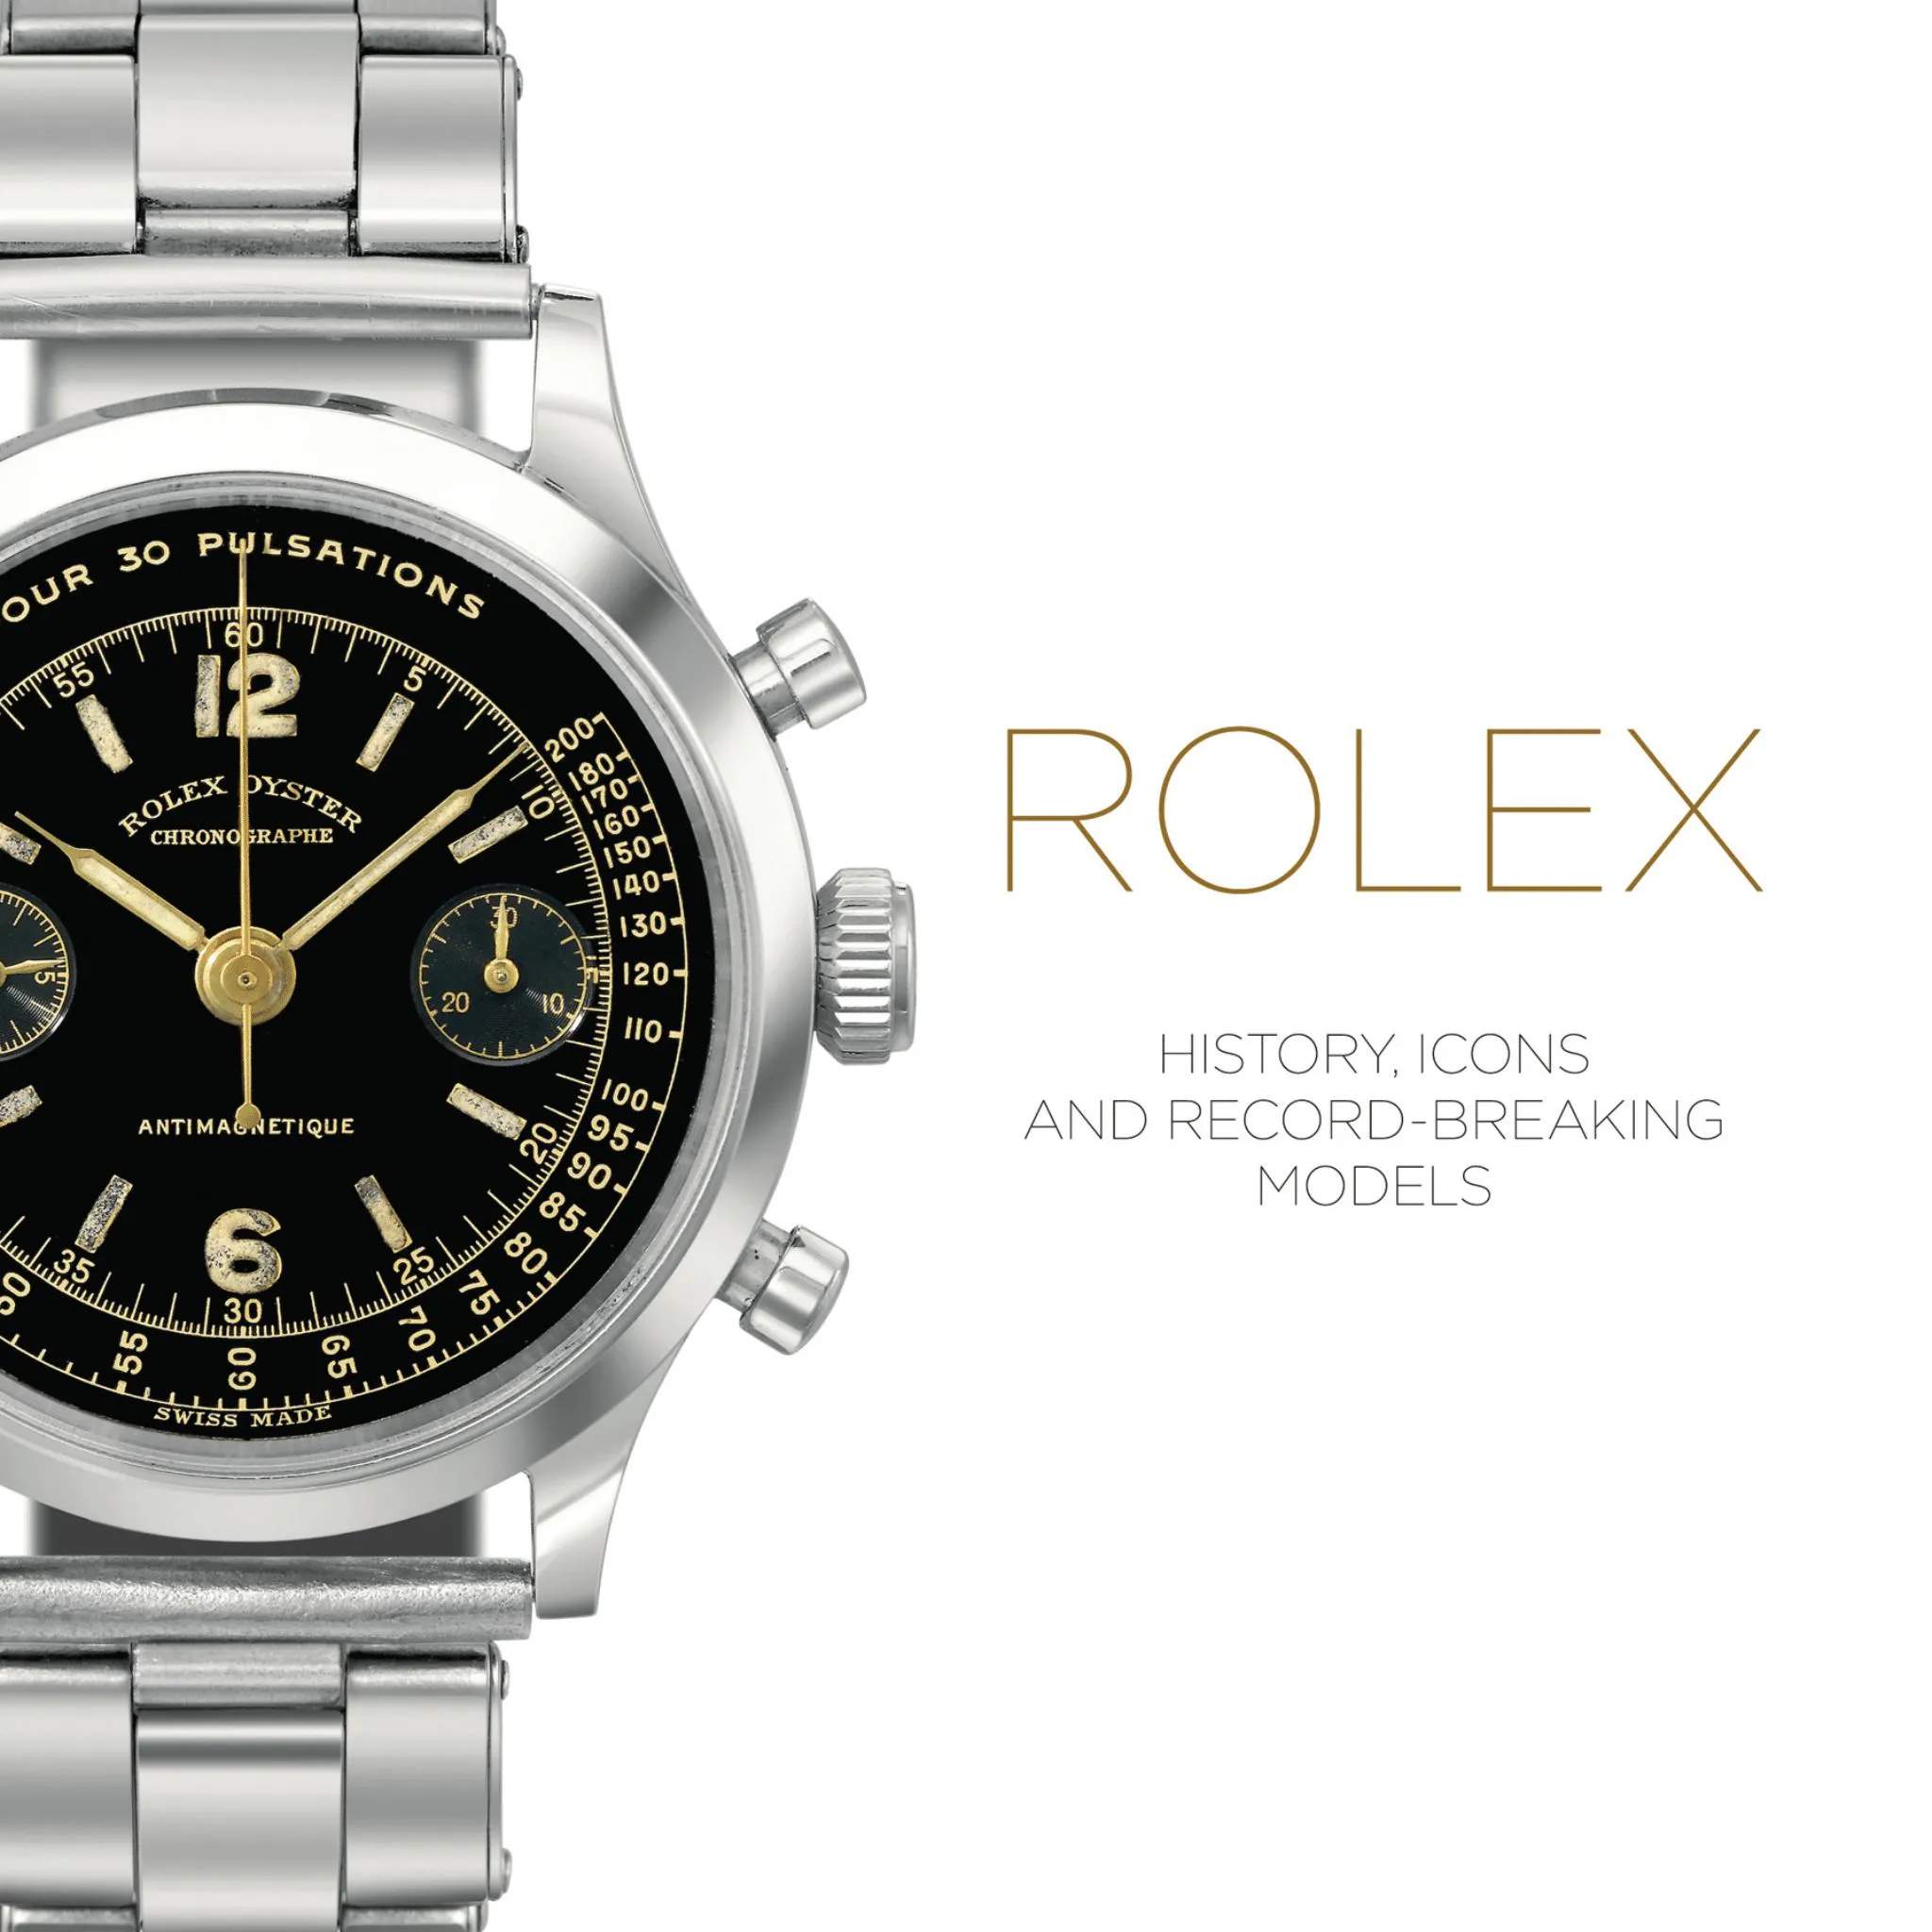 Rolex History, Icons and Record-Breaking Models - Af Mara Cappelletti & Osvaldo Patrizzi